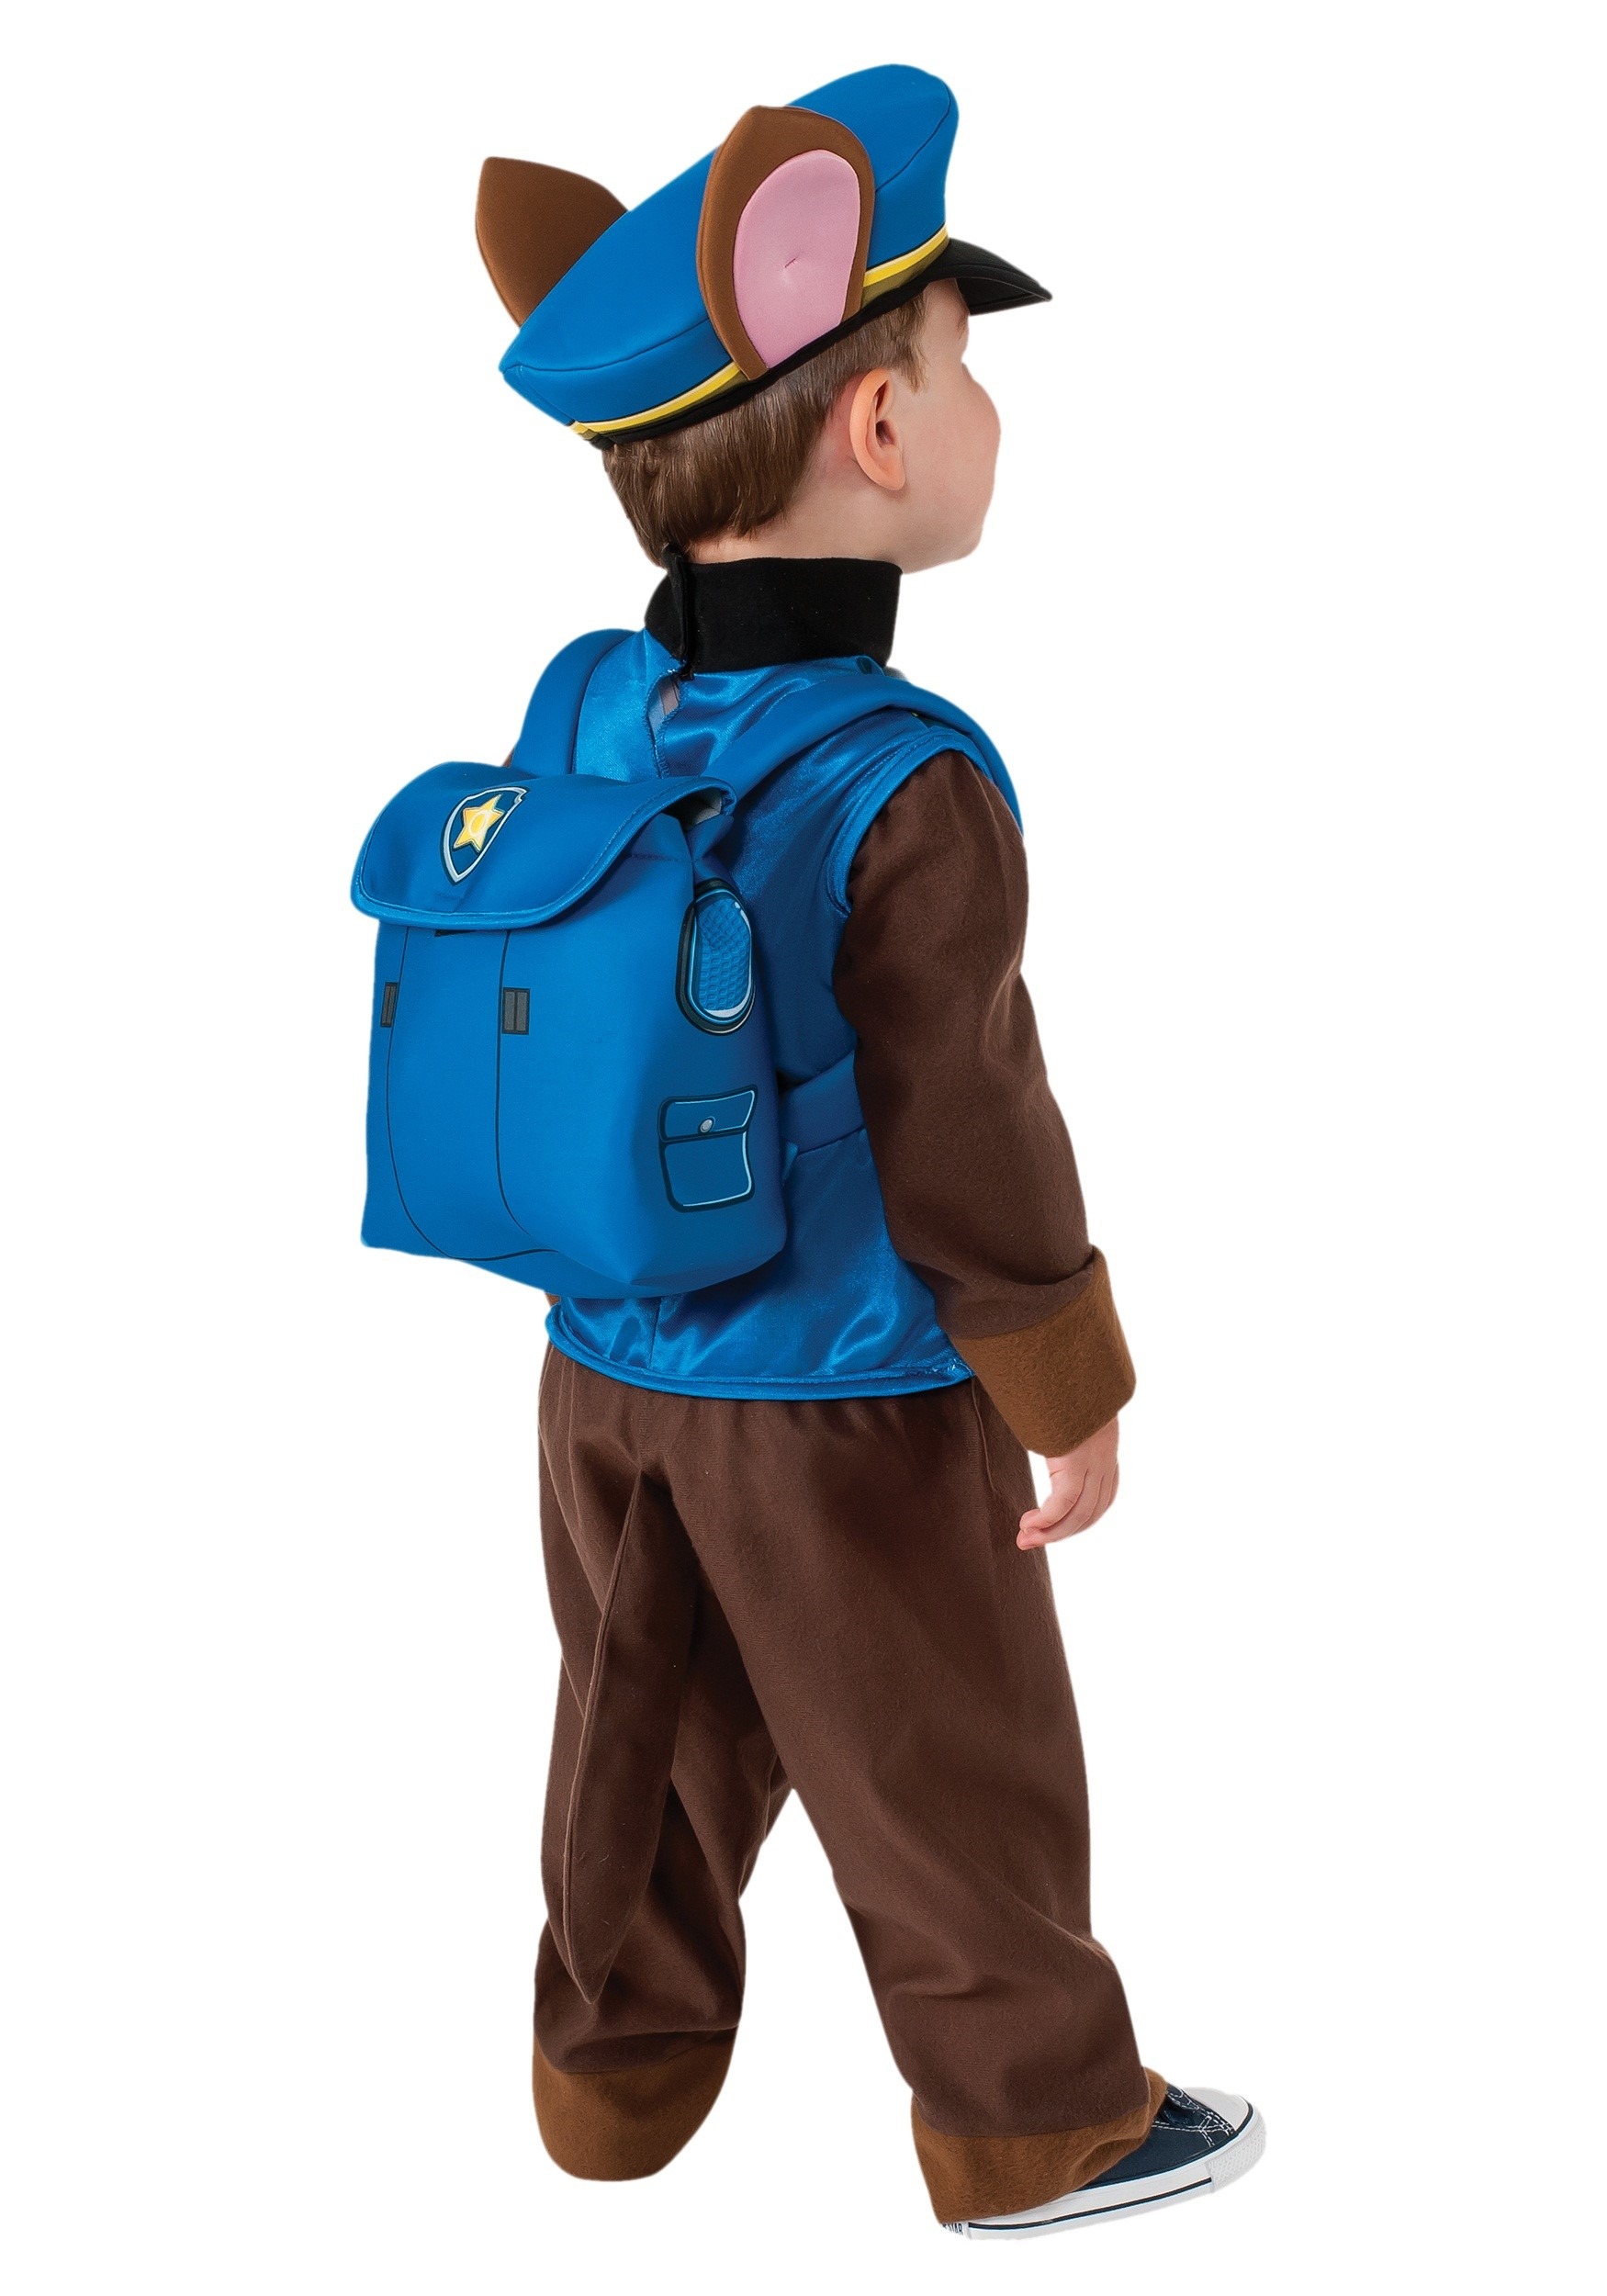 Chase Child Costume from Paw Patrol TV Show Costume.